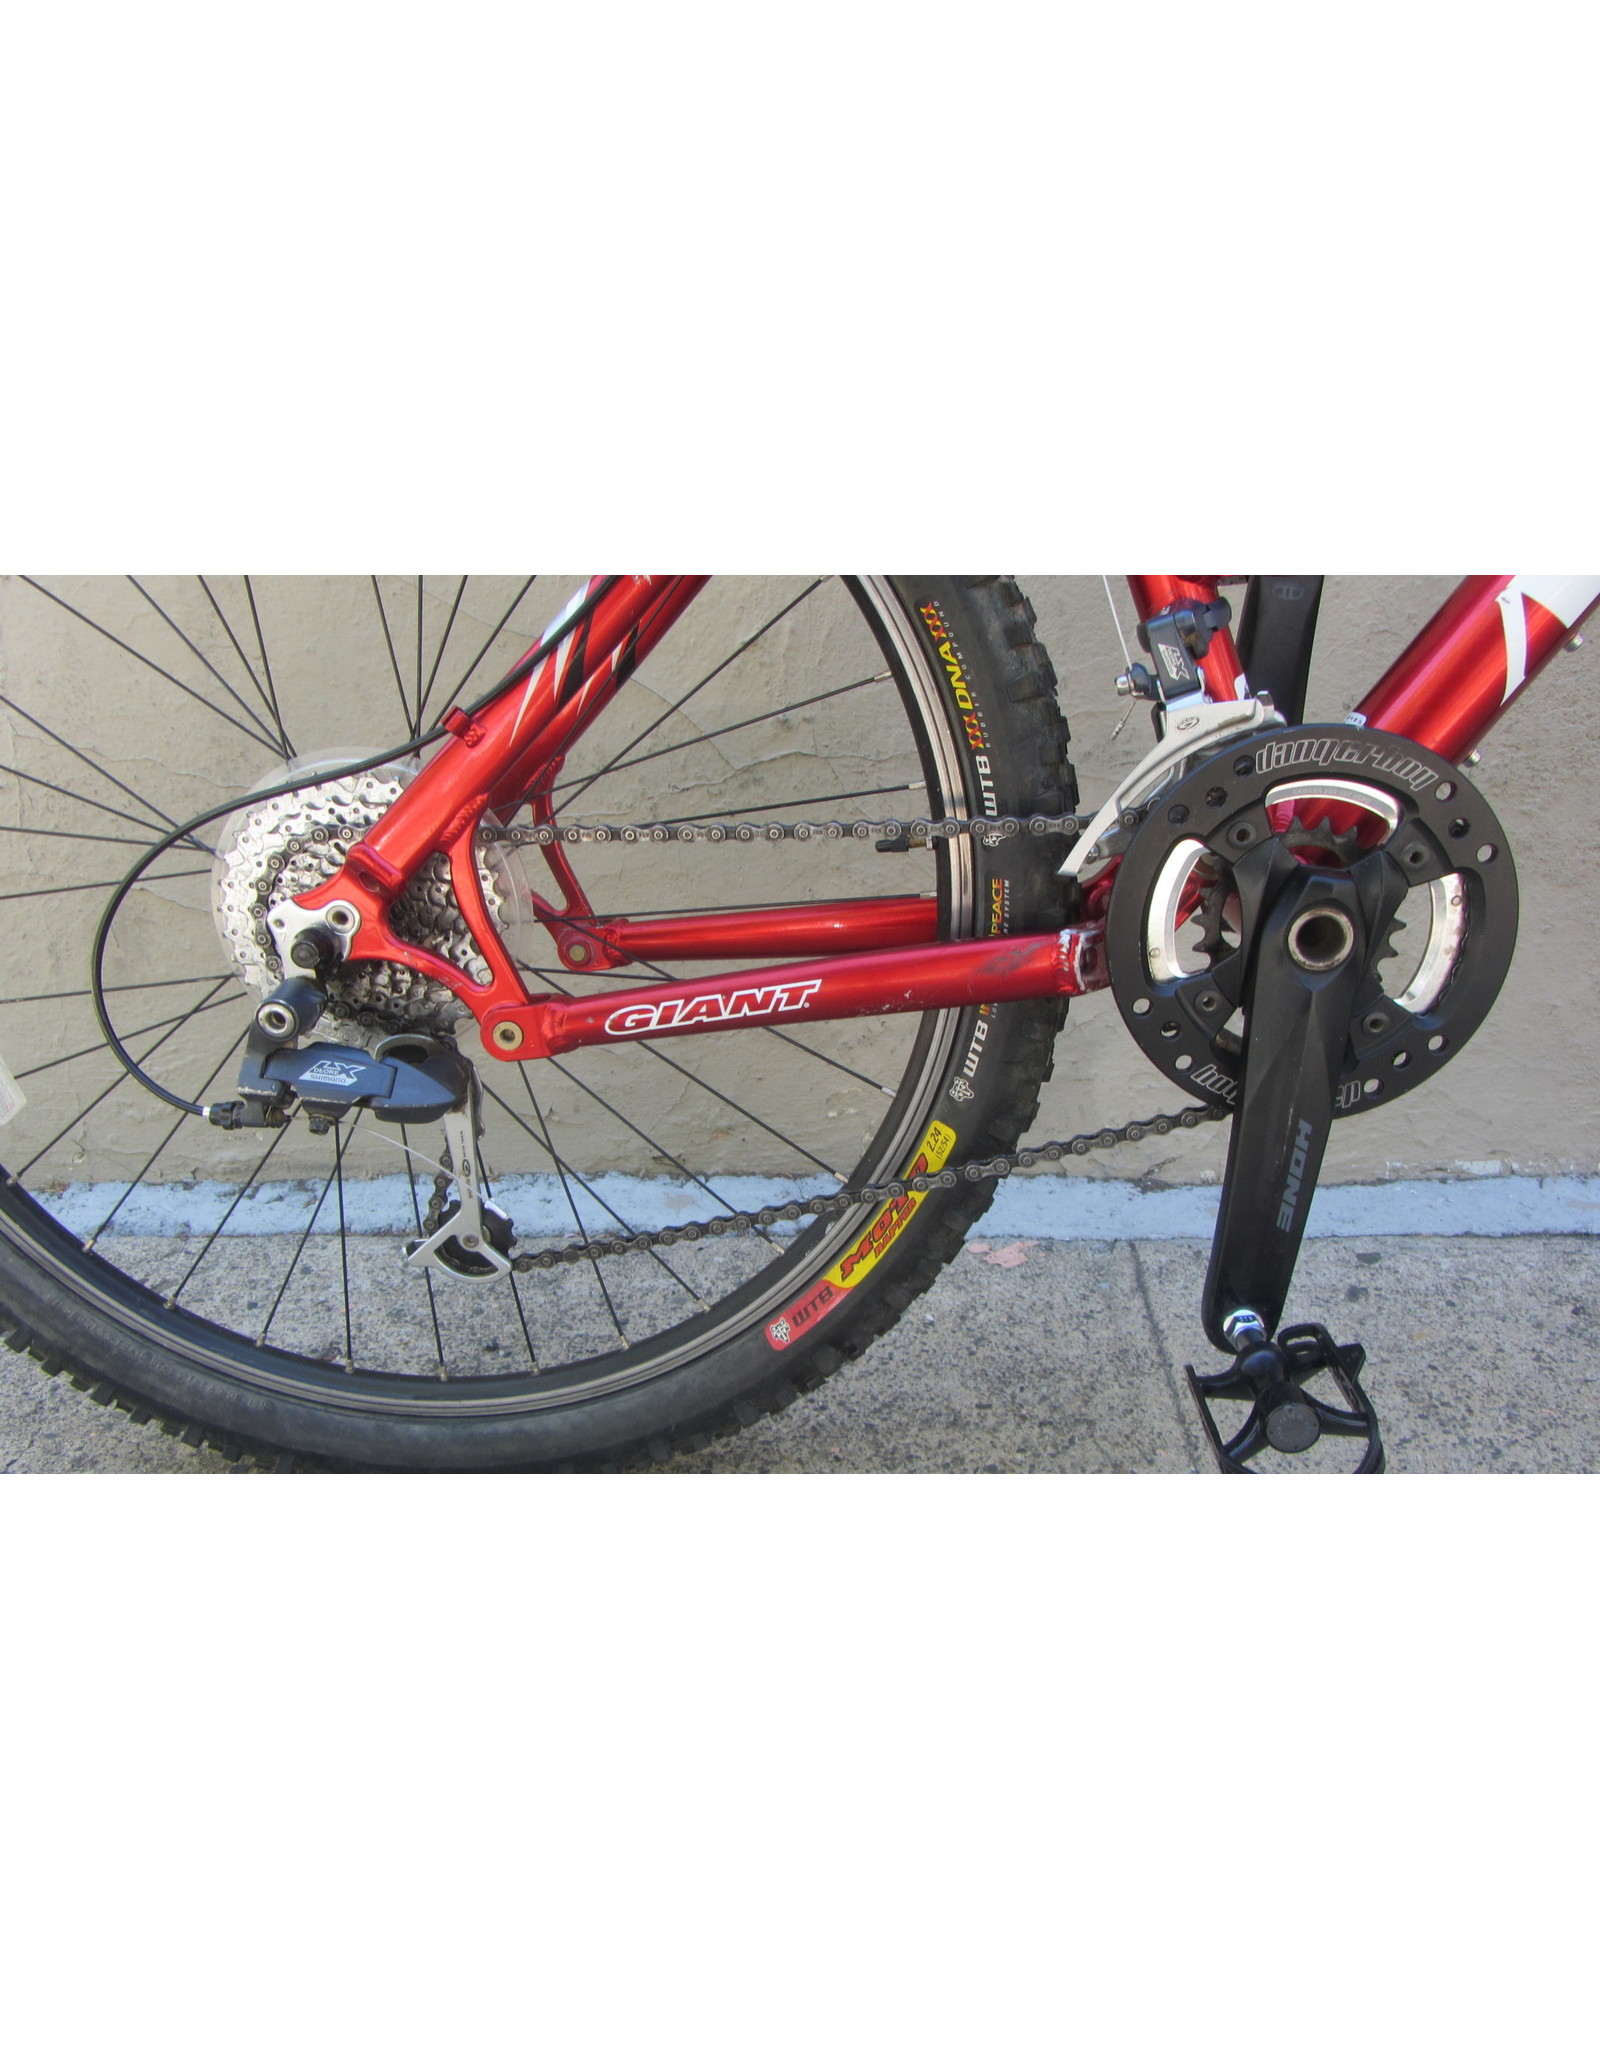 Giant Giant NRS 2, 2004, 19 Inches, Red